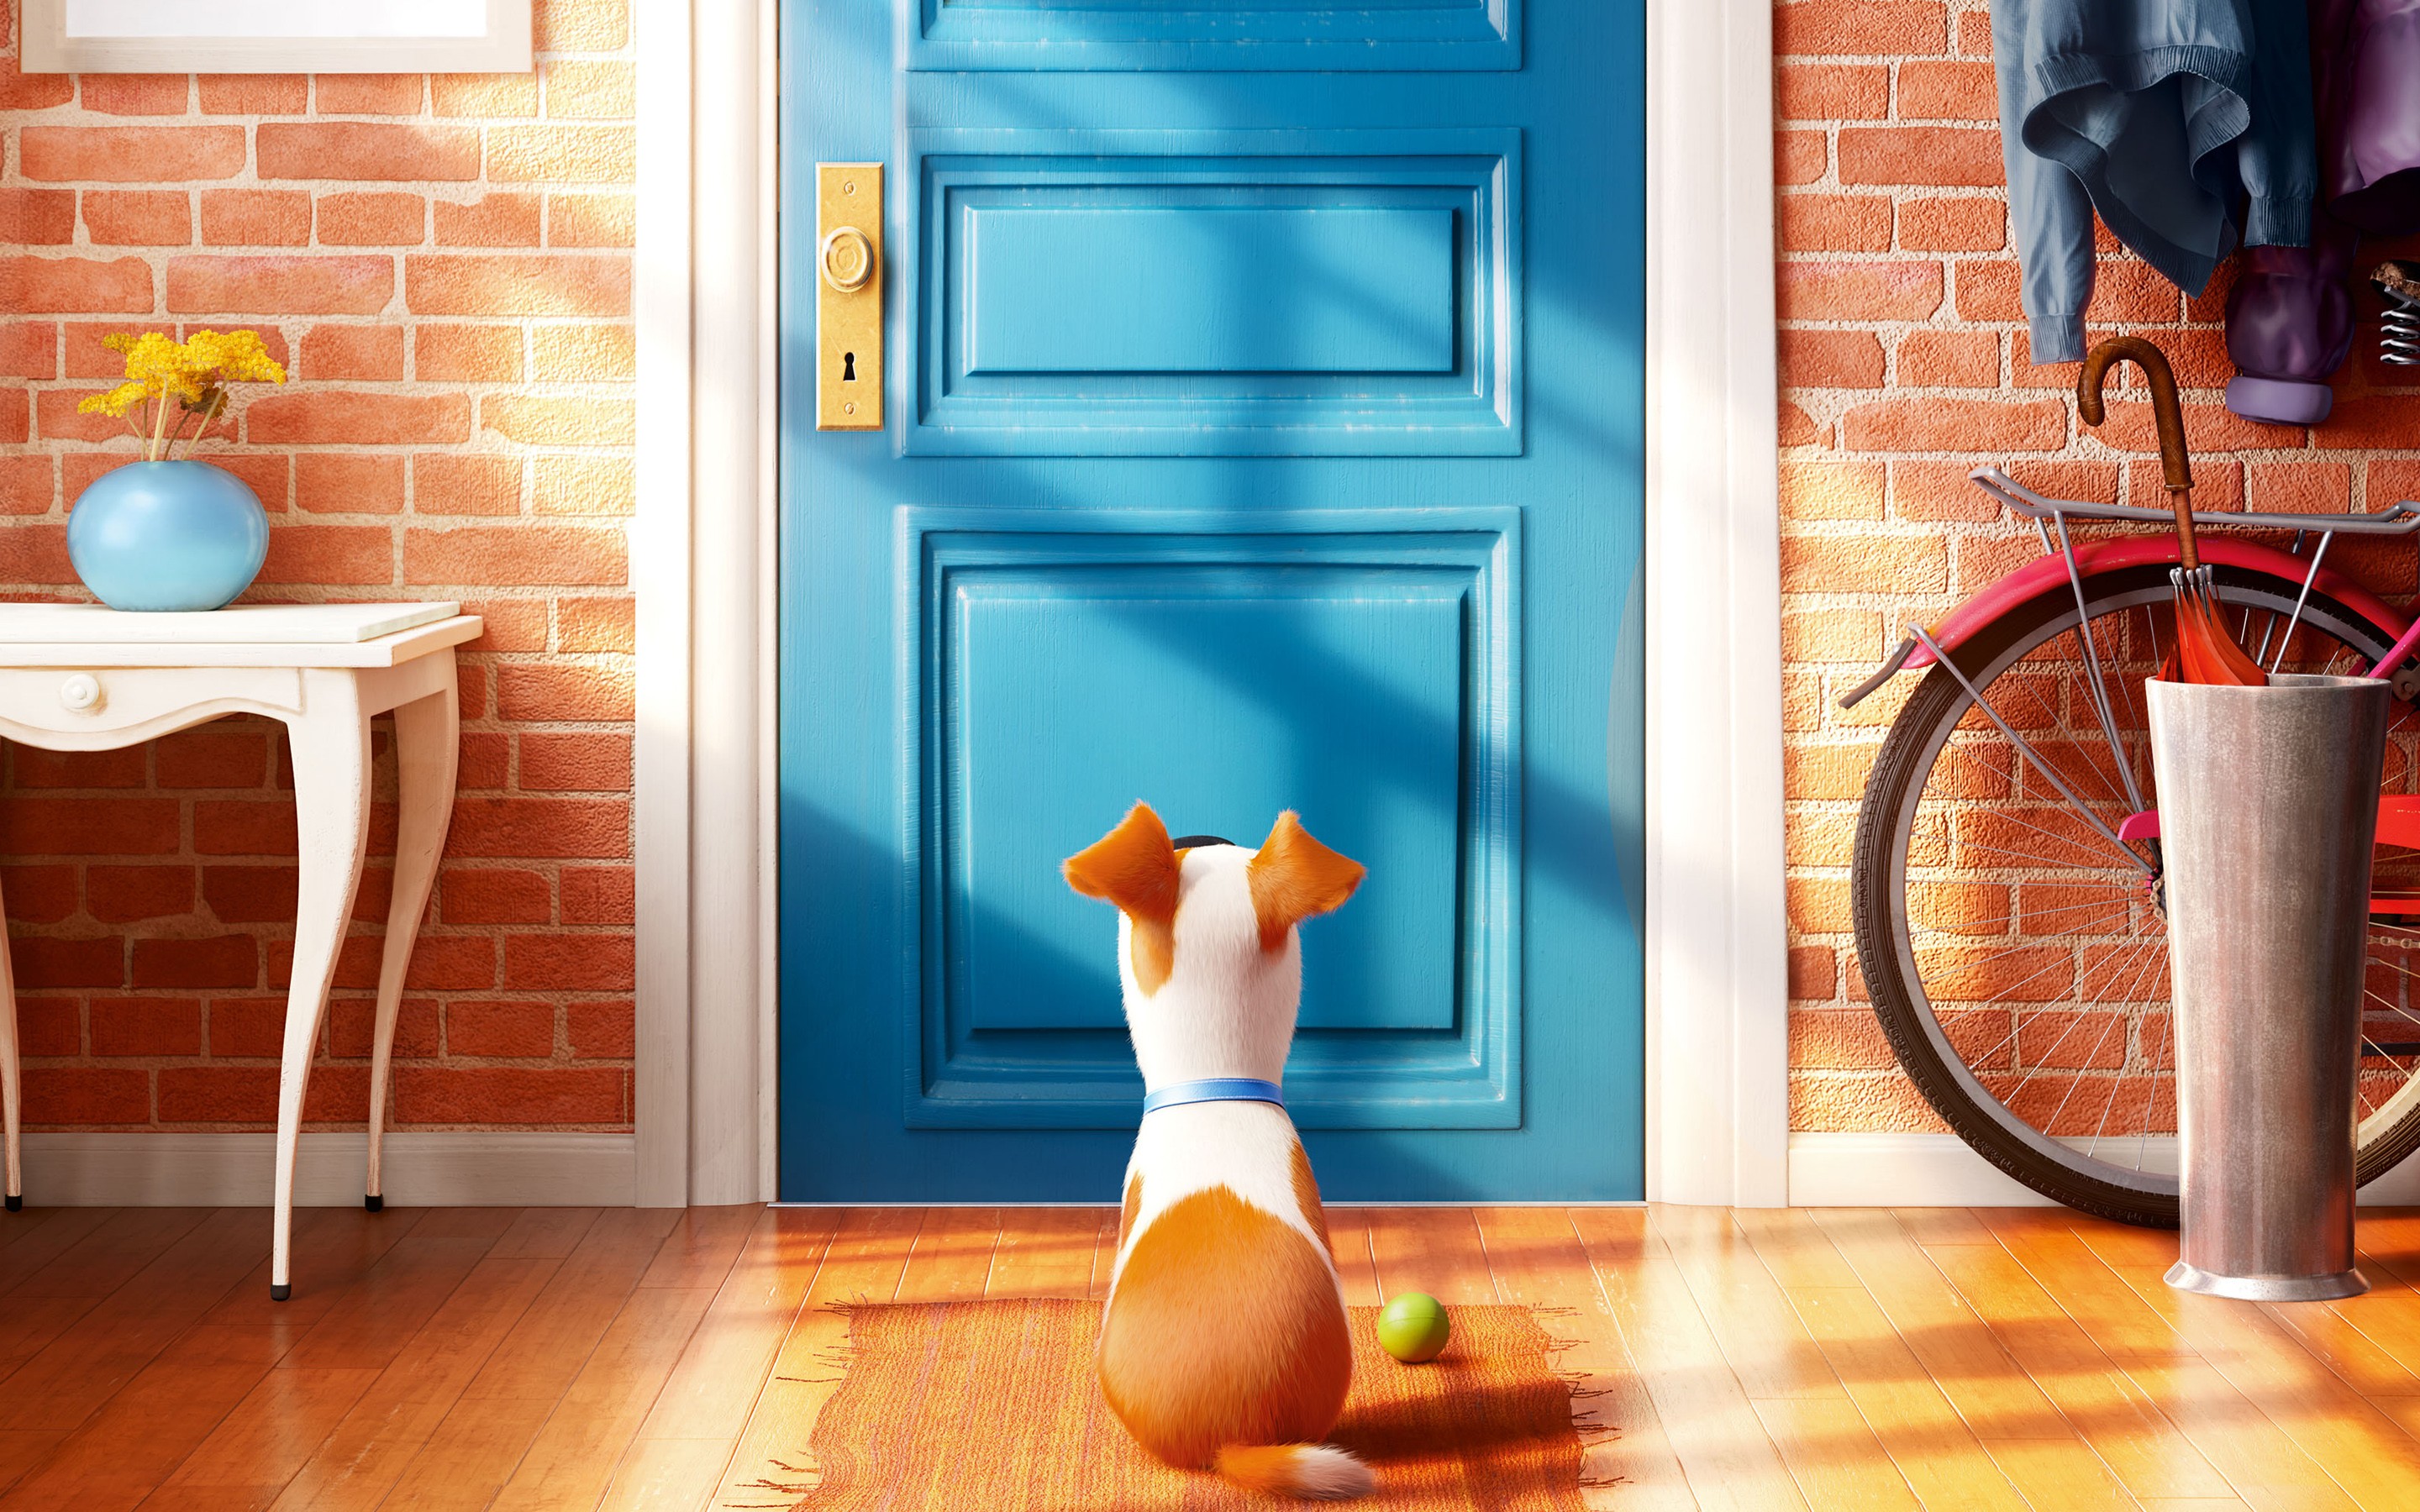 General 2880x1800 The Secret Life of Pets animated movies movies movie scenes